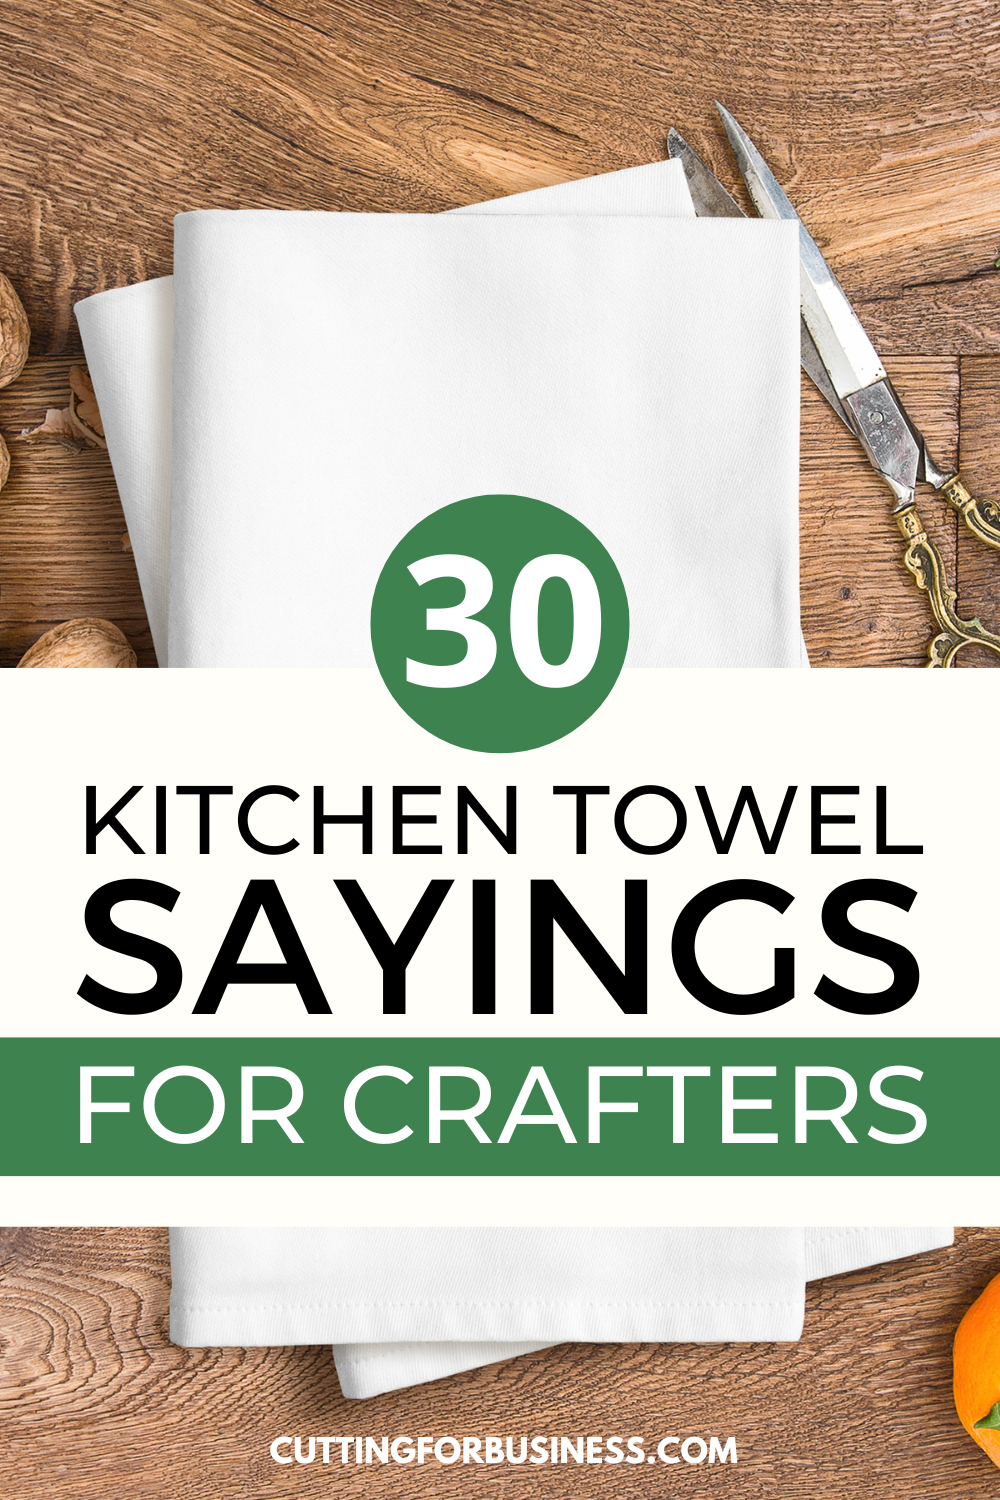 30+ Kitchen Towel Sayings for Crafters - cuttingforbusiness.com.